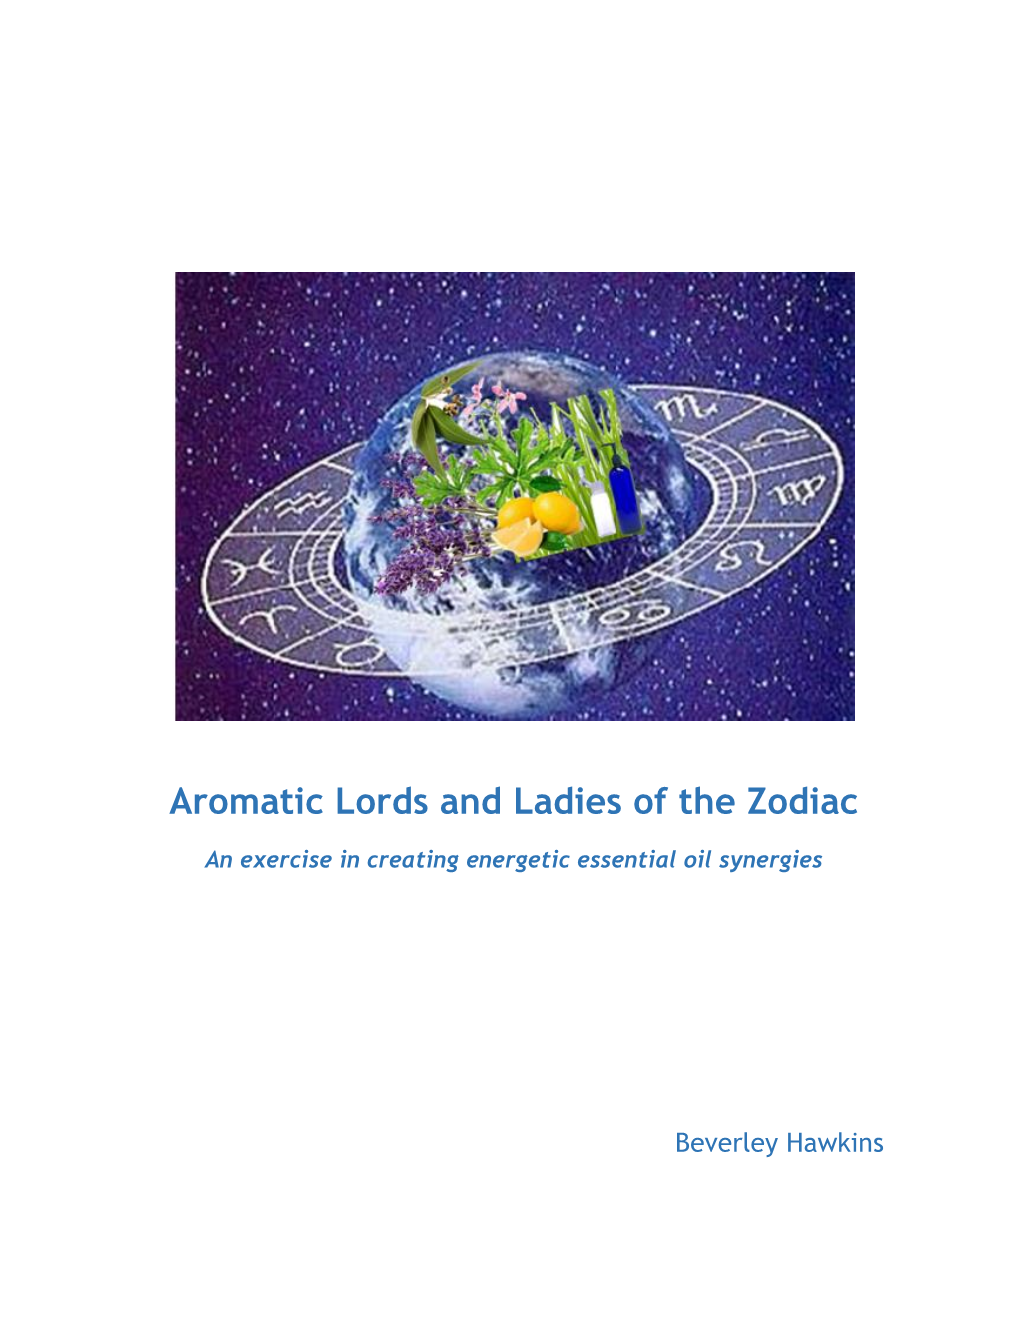 Aromatic Lords and Ladies of the Zodiac